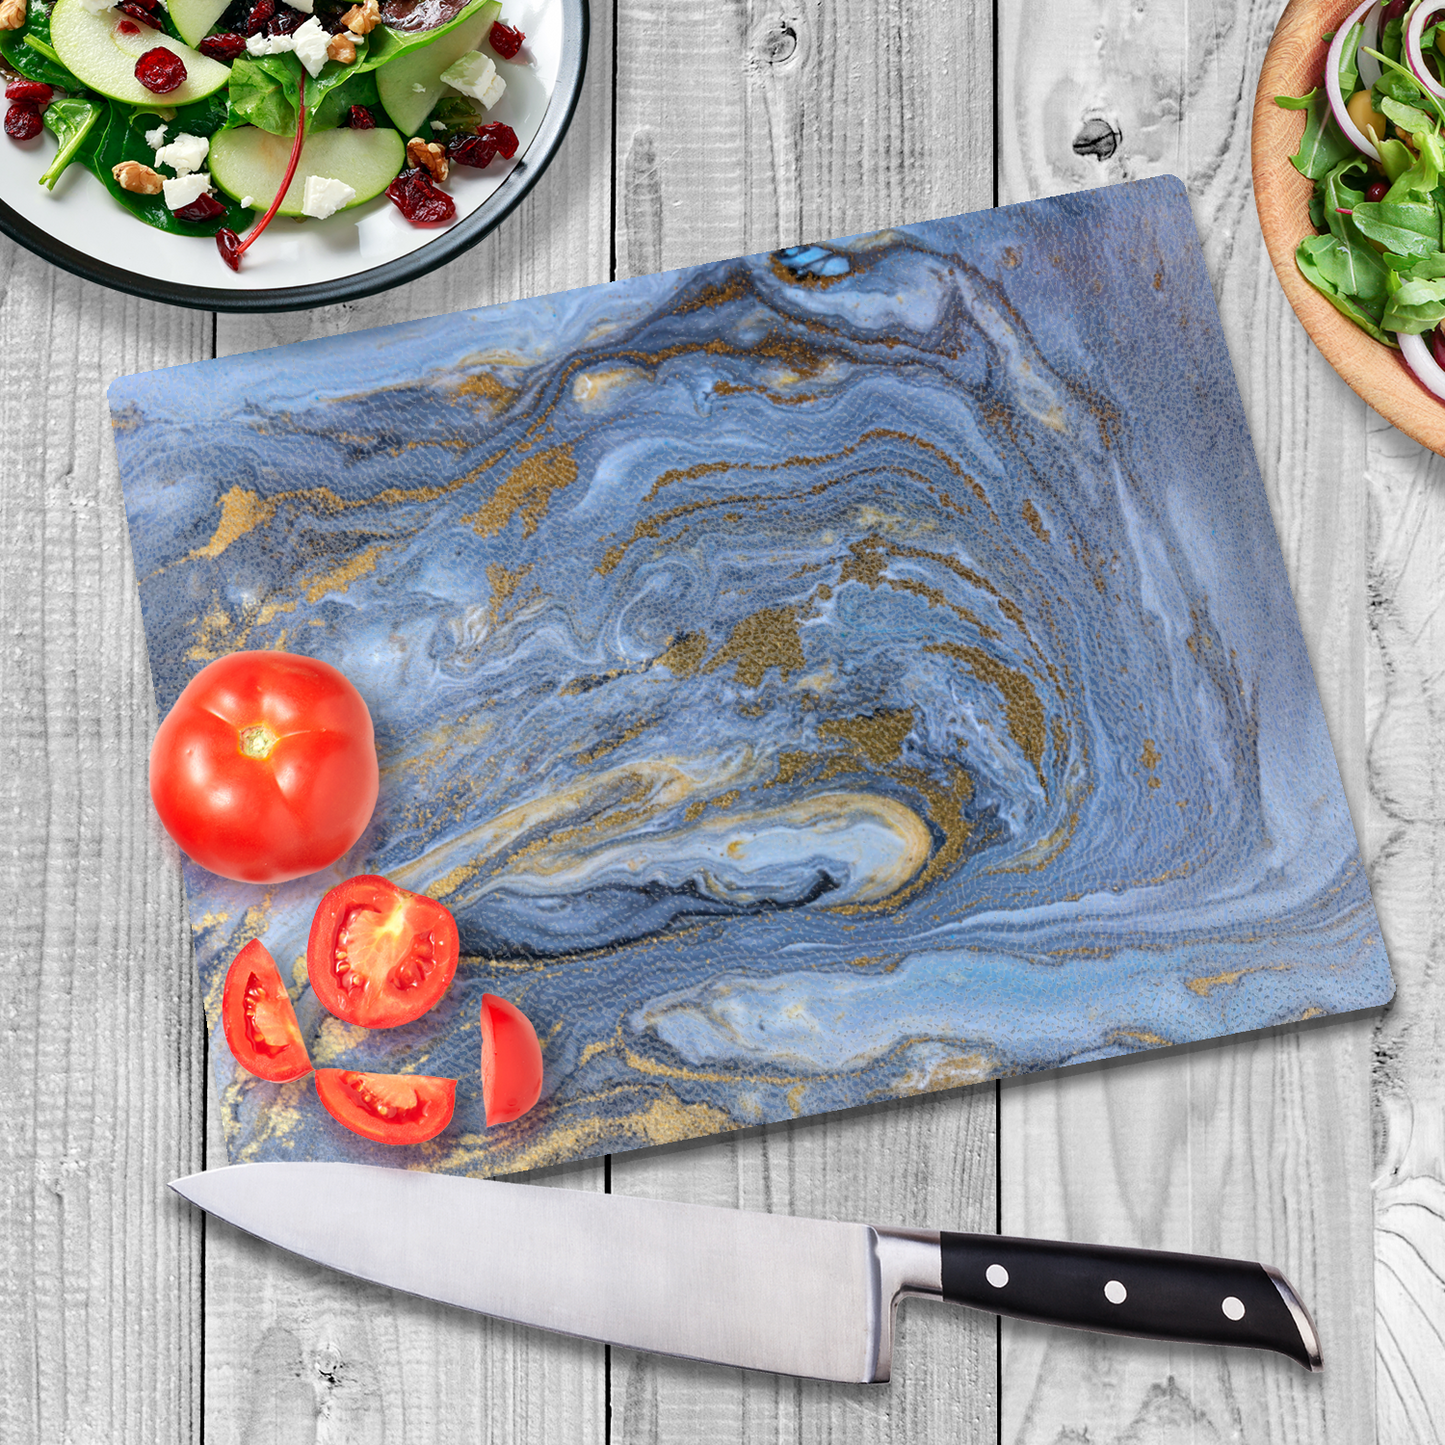 Geode Style Blue Tempered Glass Cutting Chopping Charcuterie Board